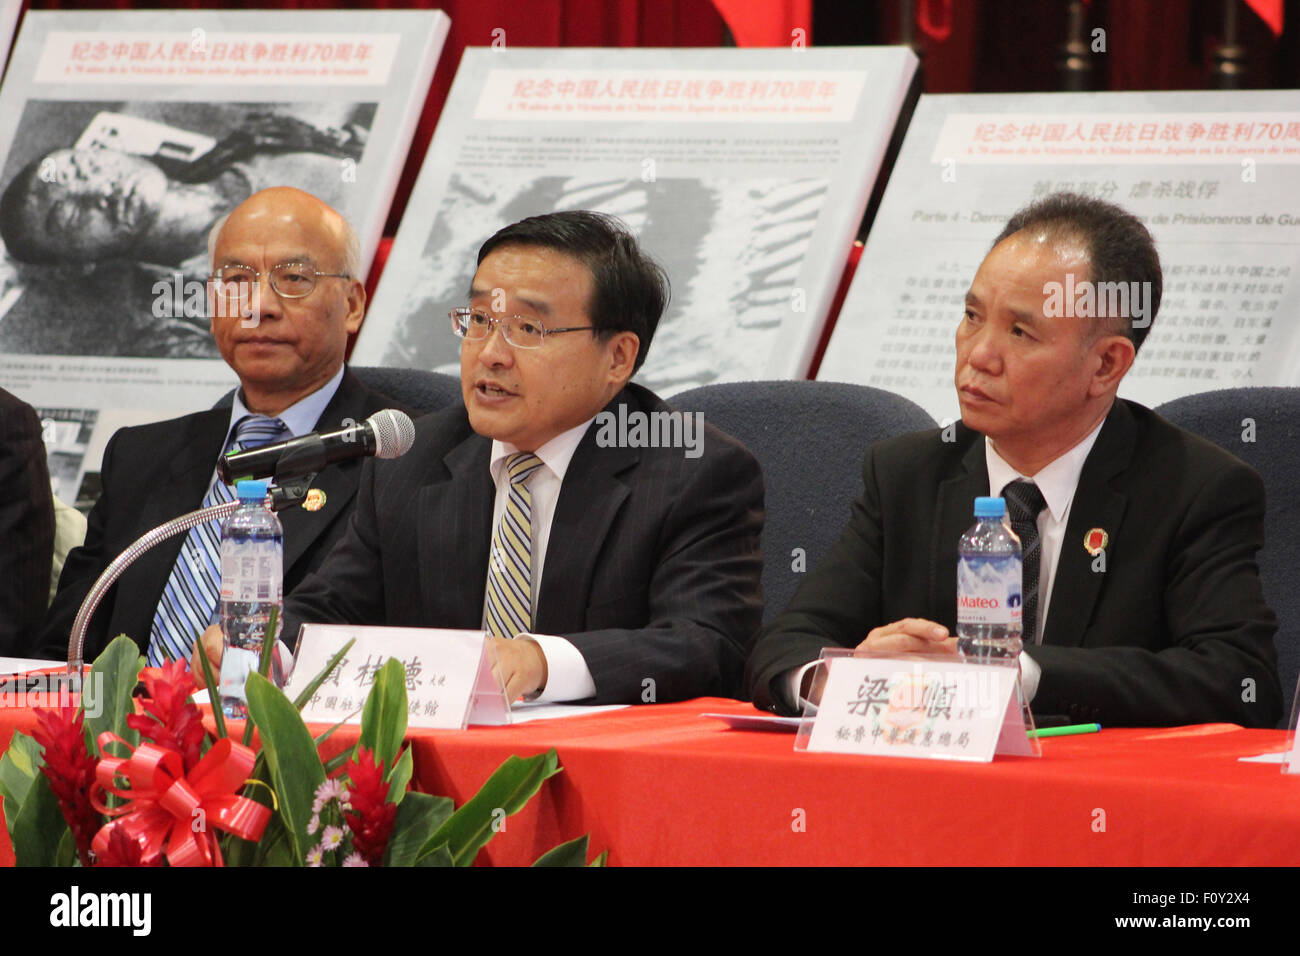 Lima, Peru. 22nd Aug, 2015. Chinese Ambassador to Peru Jia Guide (C) delivers a speech during the exposition 'La Historia No Se Puede Olvidar' (History Can Not Be Forgotten) at the facilities of the Chinese Charity Central Society in Lima city, Peru, on Aug. 22, 2015. Chinese community in Peru is celebrating the 70th anniversary of the victory of the World Anti-Fascist War with an exposition called 'La Historia No Se Puede Olvidar' (History Can Not Be Forgotten). (Xinhua/Luis Camacho) (rhj) © /Xinhua/Alamy Live News Stock Photo